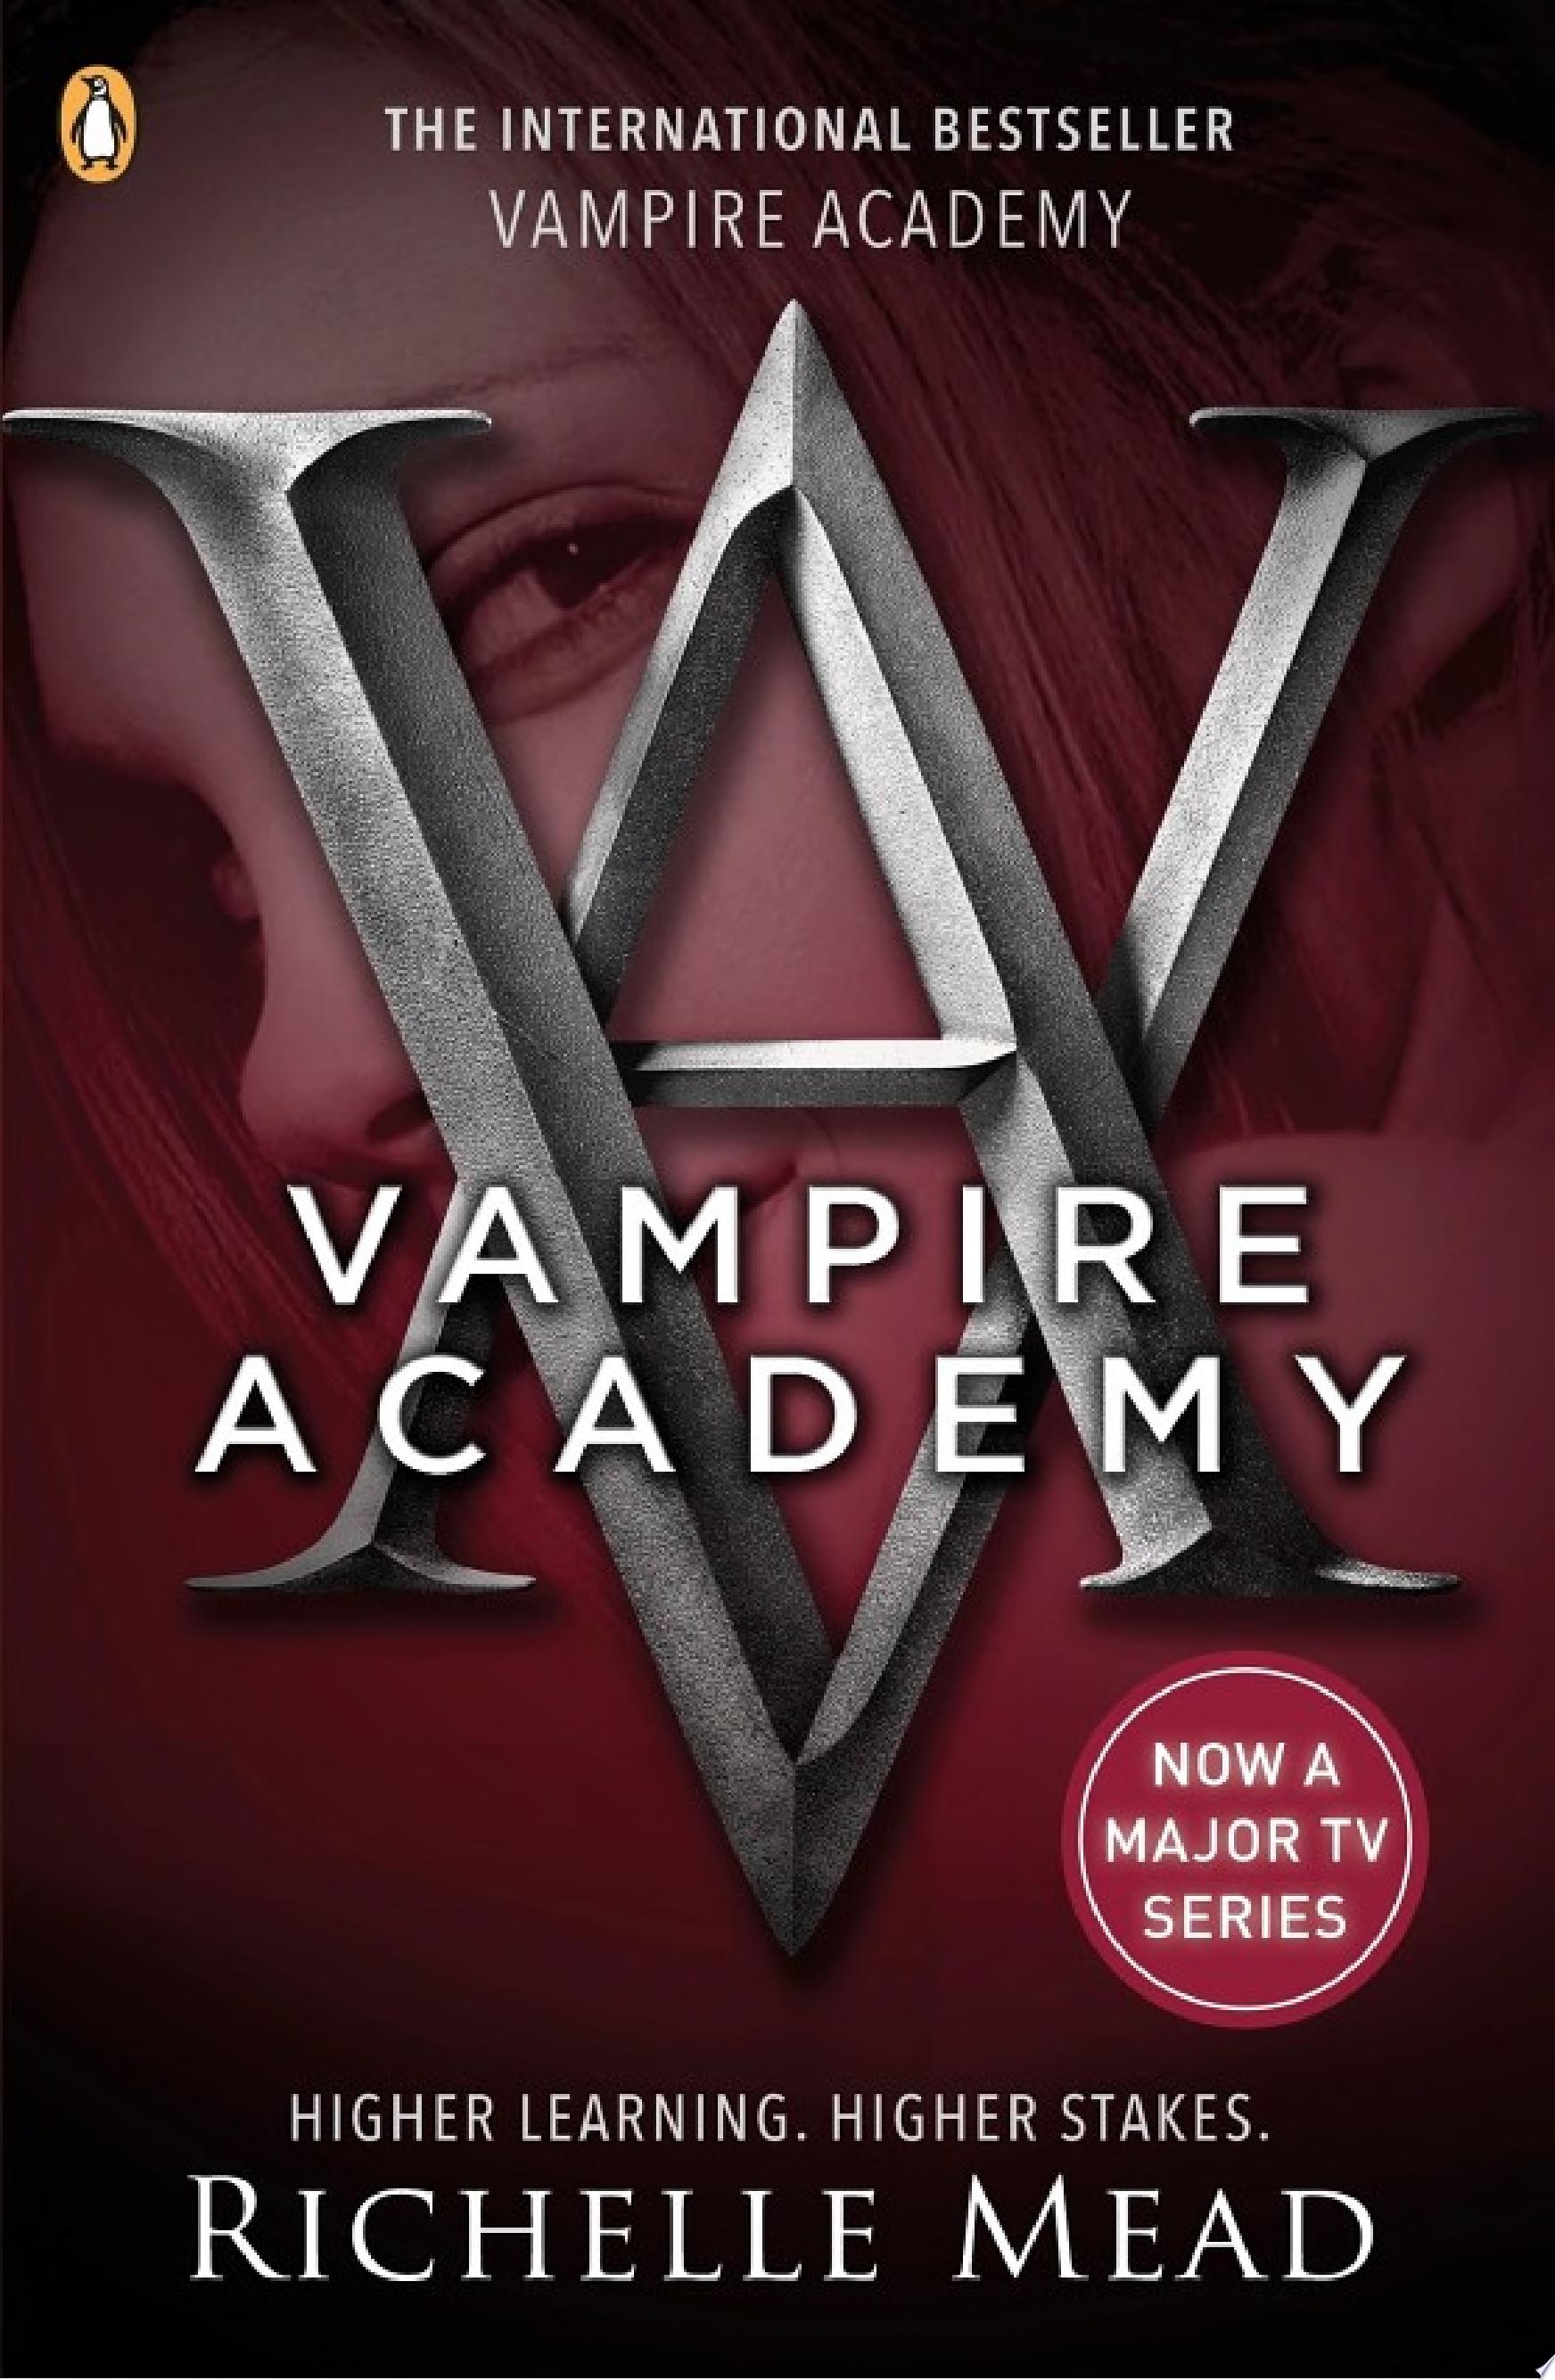 Image for "Vampire Academy (book 1)"